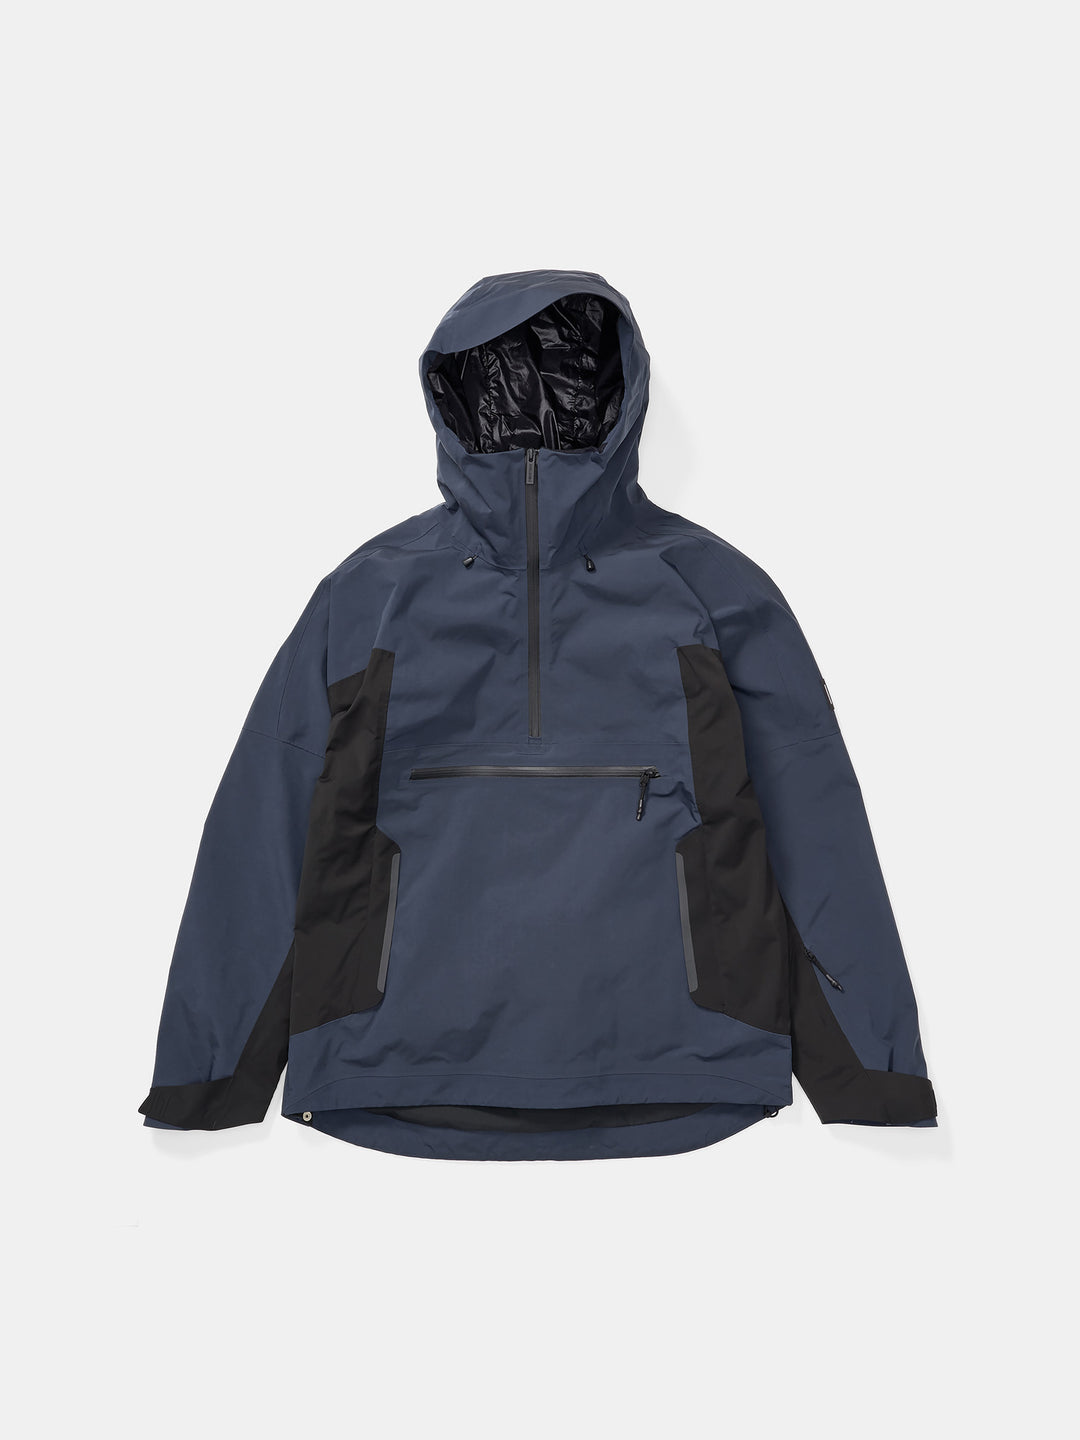 HOLDEN - Men's Snow Outerwear, The New Look of Snowsport Luxury ...